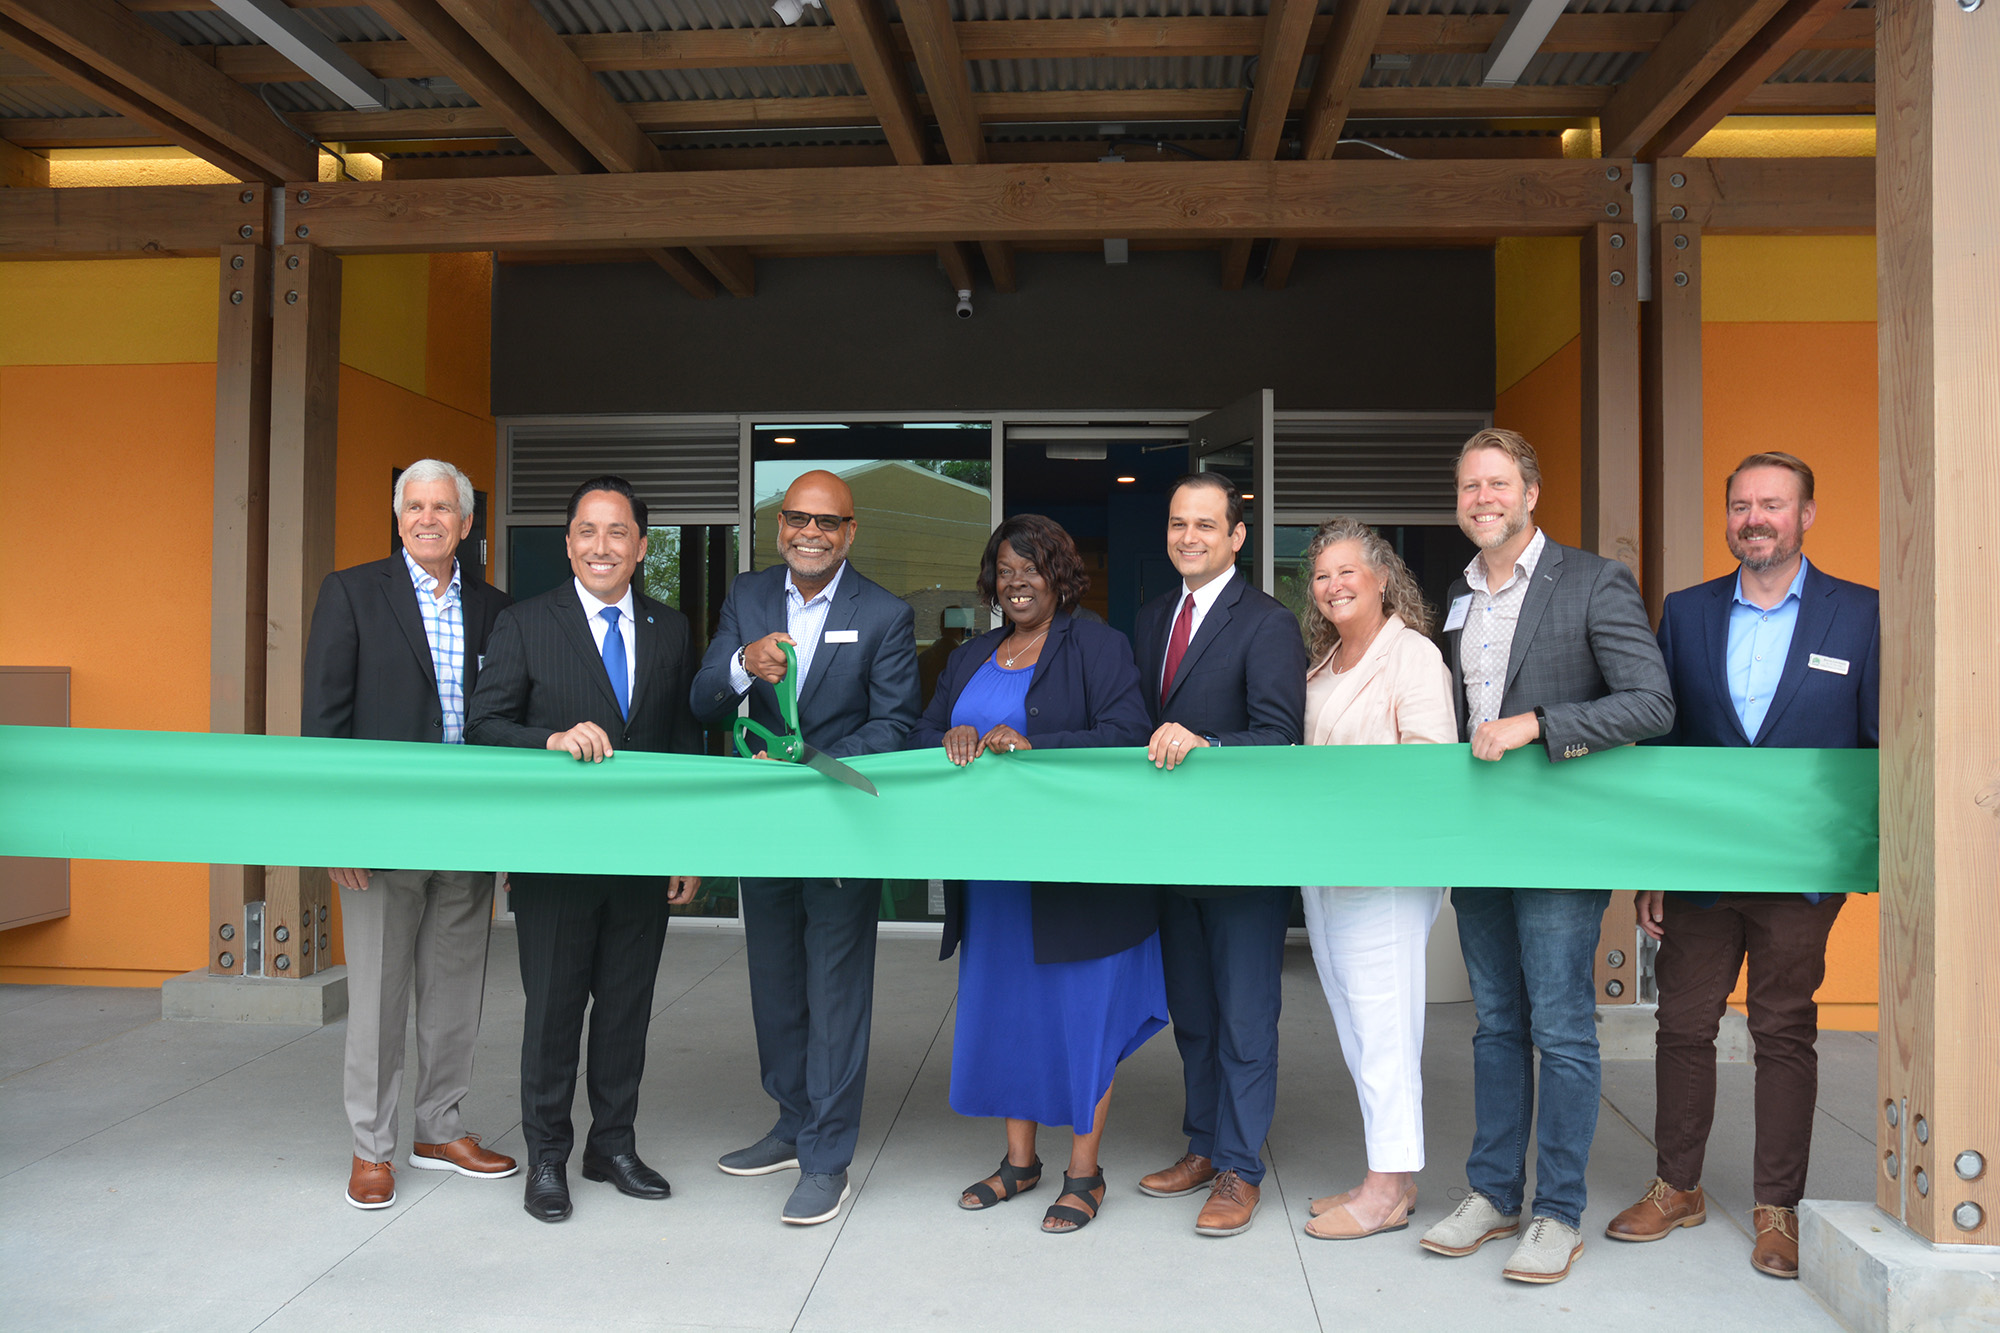 Ribbon cutting ceremony at affordable housing community for seniors